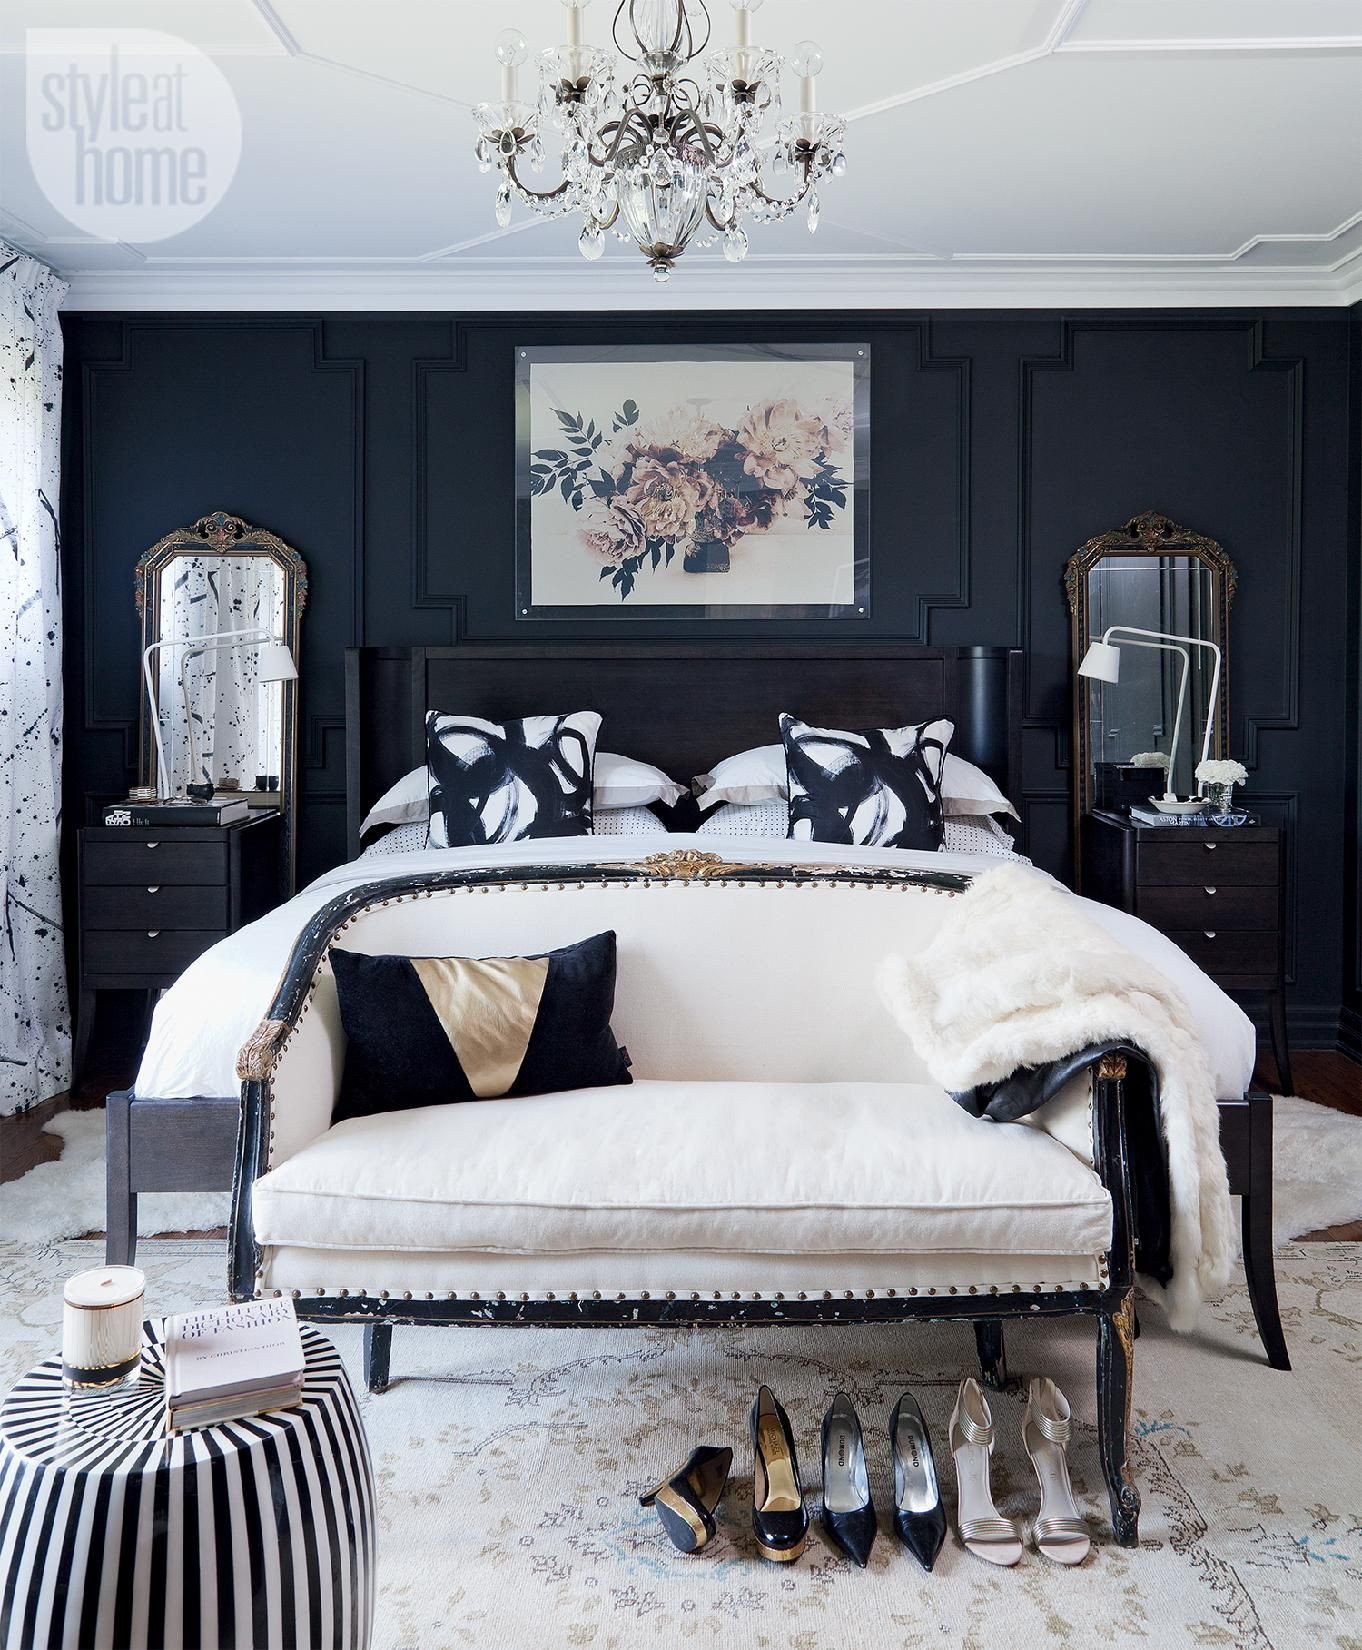 White and Gold Bedroom Ideas Inspirational Bedroom